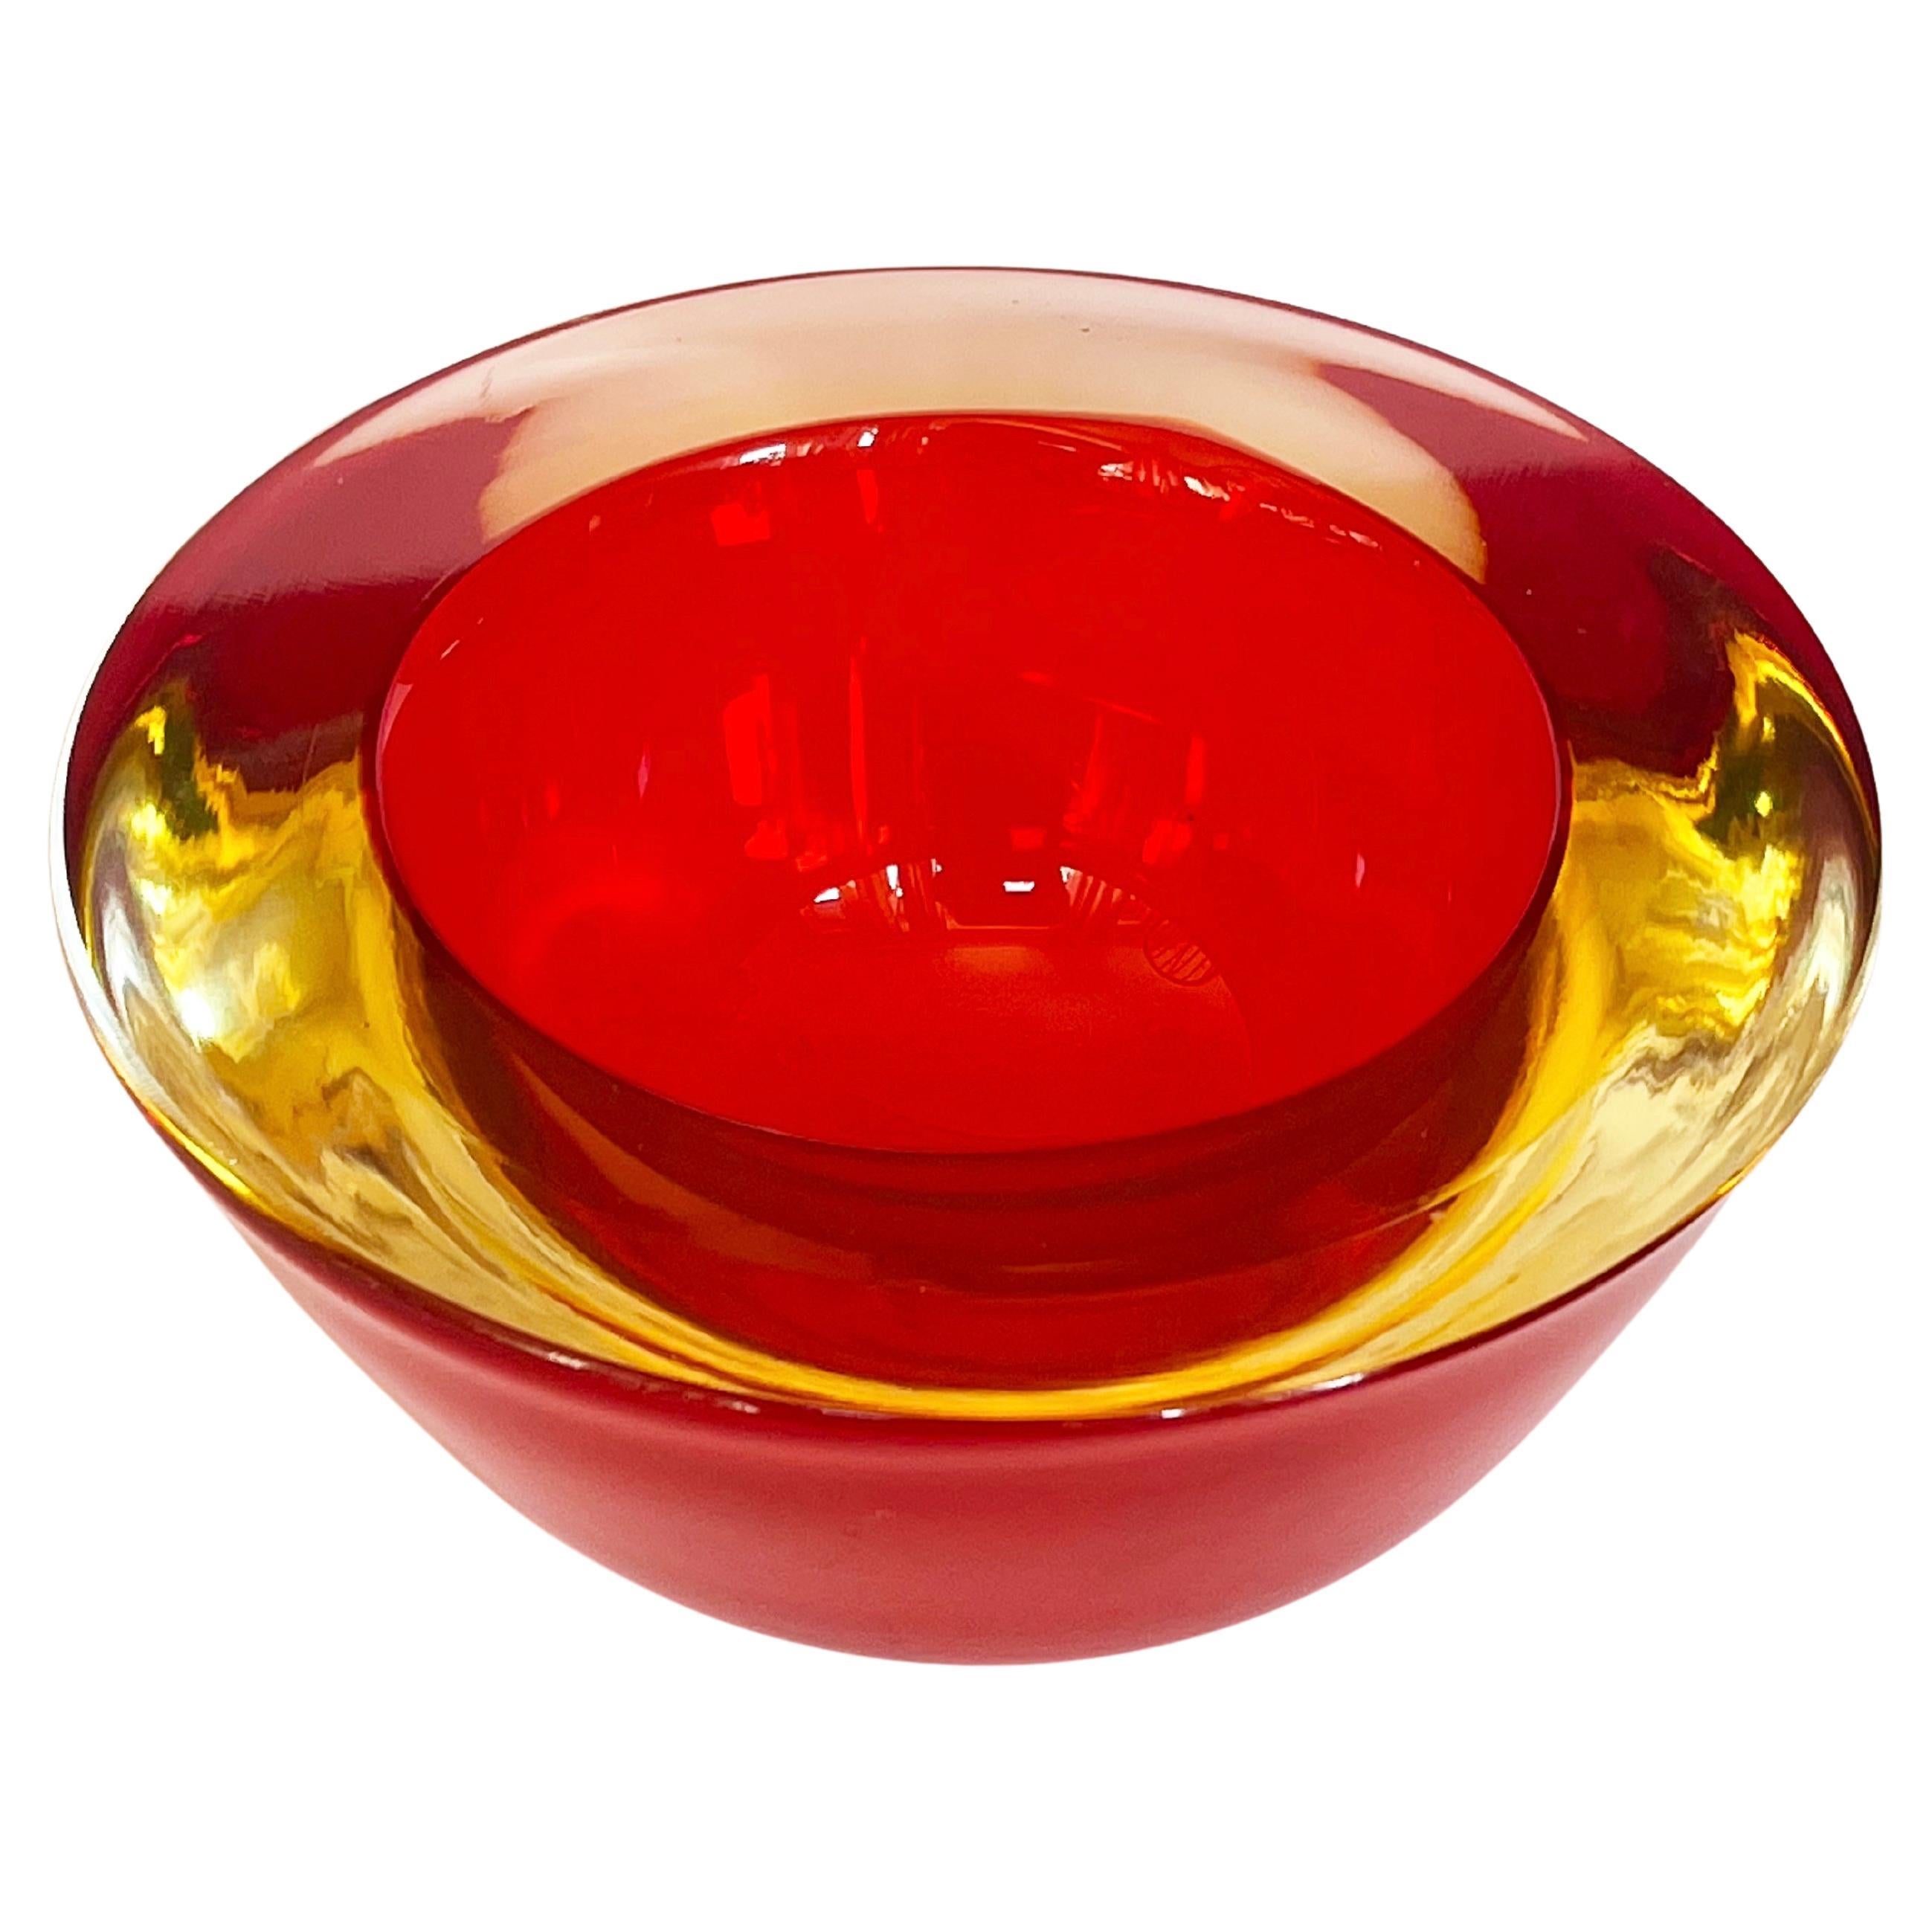 Red & Amber Chunky Murano Glas Sommerso Schale ca. 1960, Italien